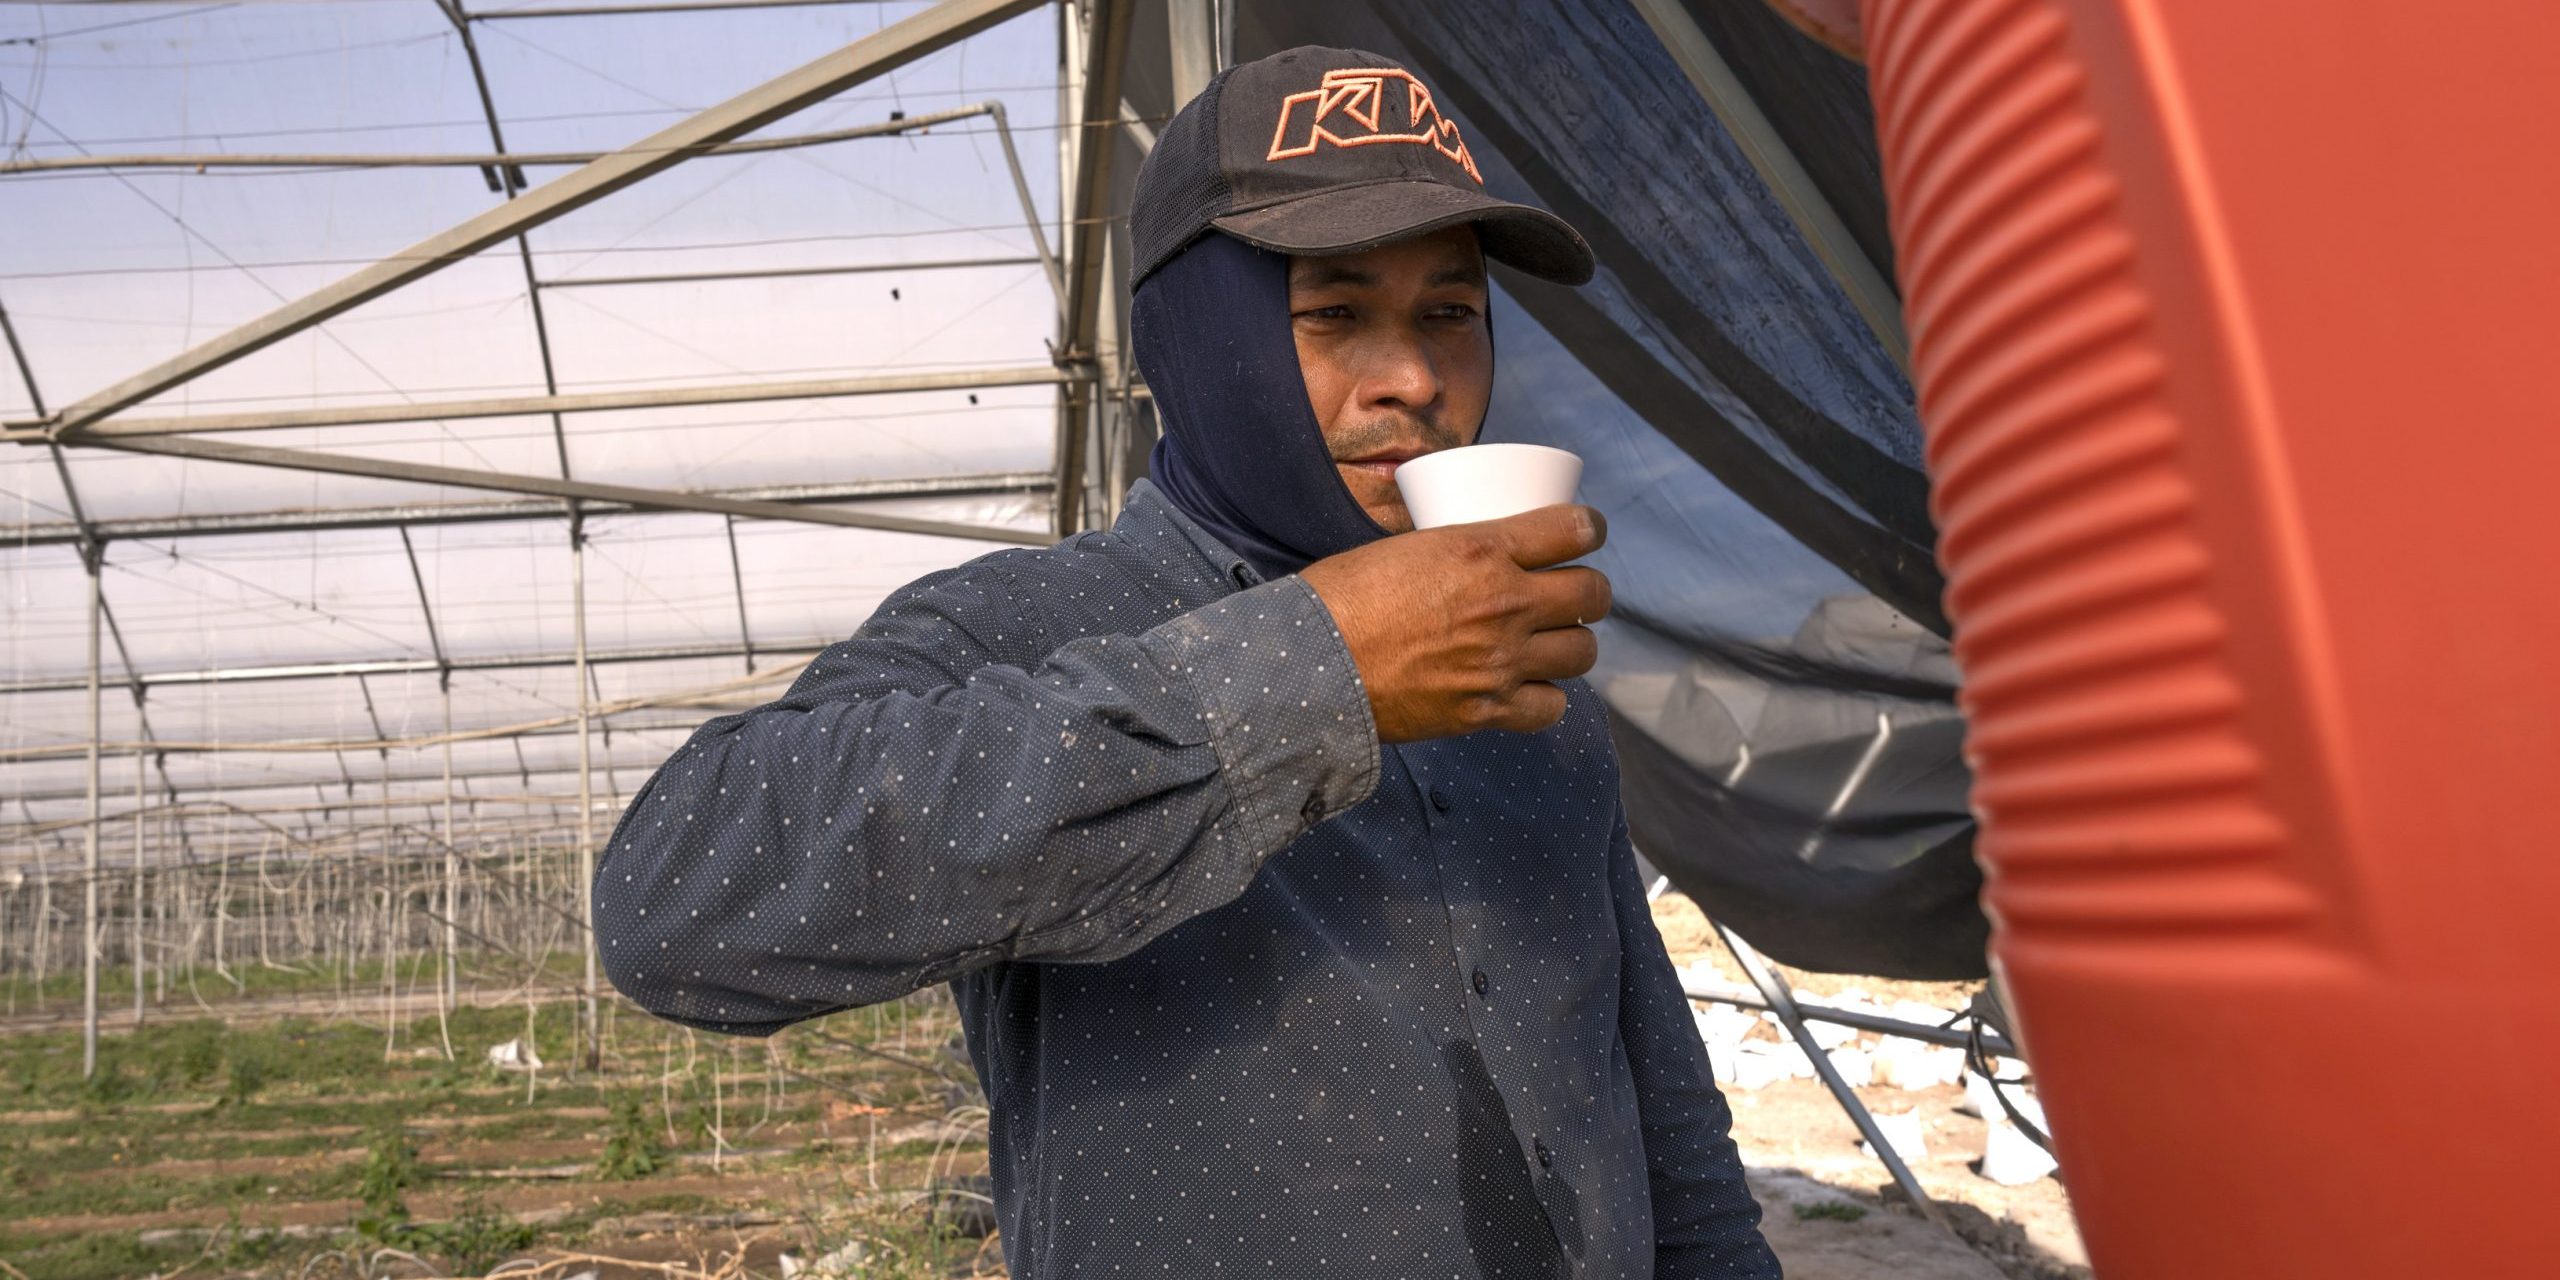 Heat Protections for Florida Farmworkers